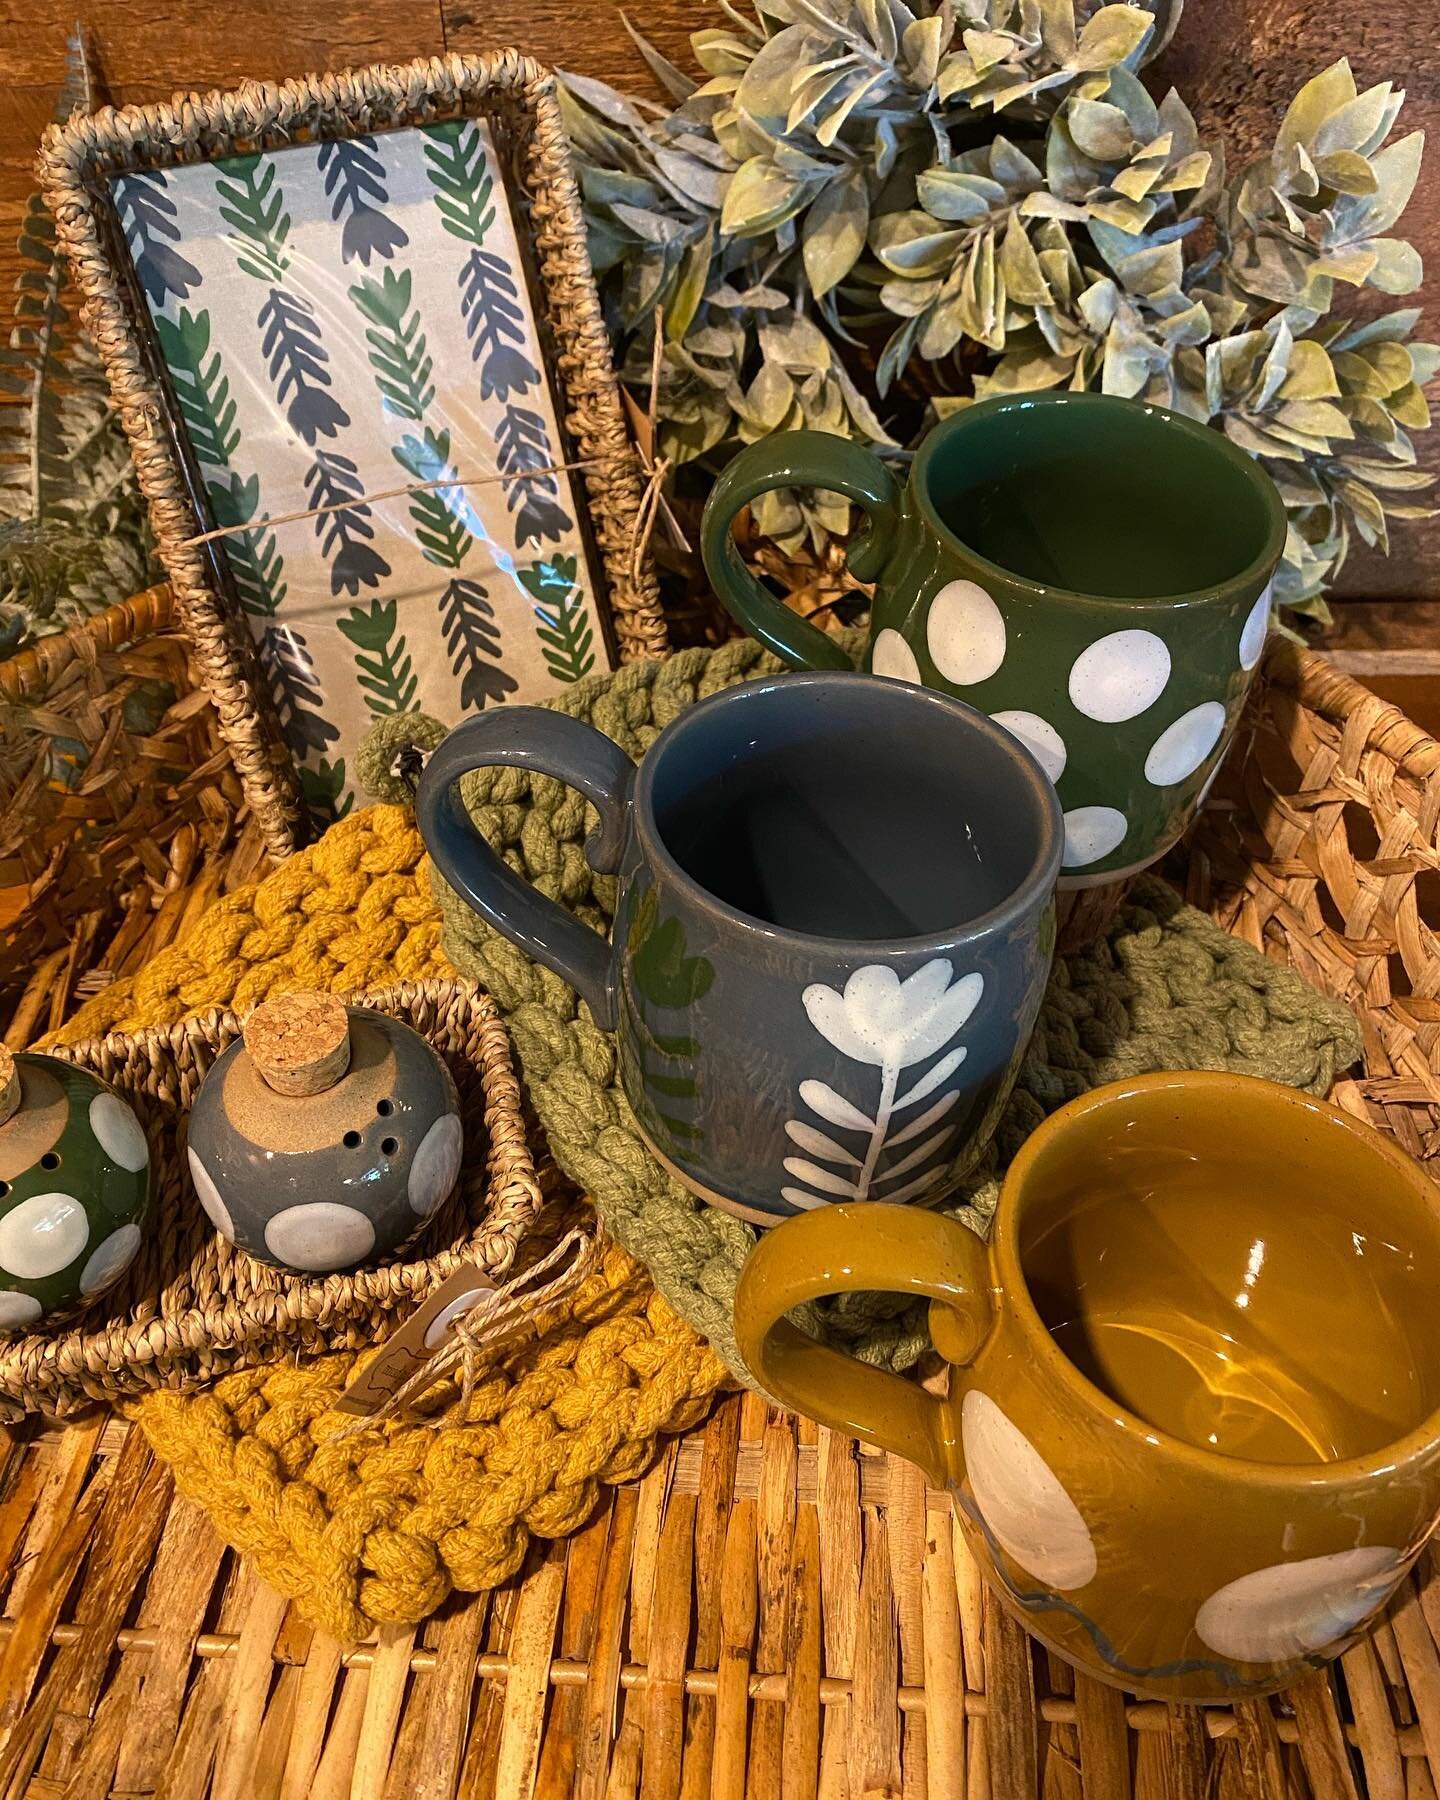 Love this selection from @mudpiegift. Fun shades of blue,mustard and green. 

#mycozyhome #farmhousestyle #nuetralcolors #cozyvibes #farmhouseaccents #primitives #shoplocal  #shopsmall #shopgeneva #genevail 
#homeinspiration #homedecor